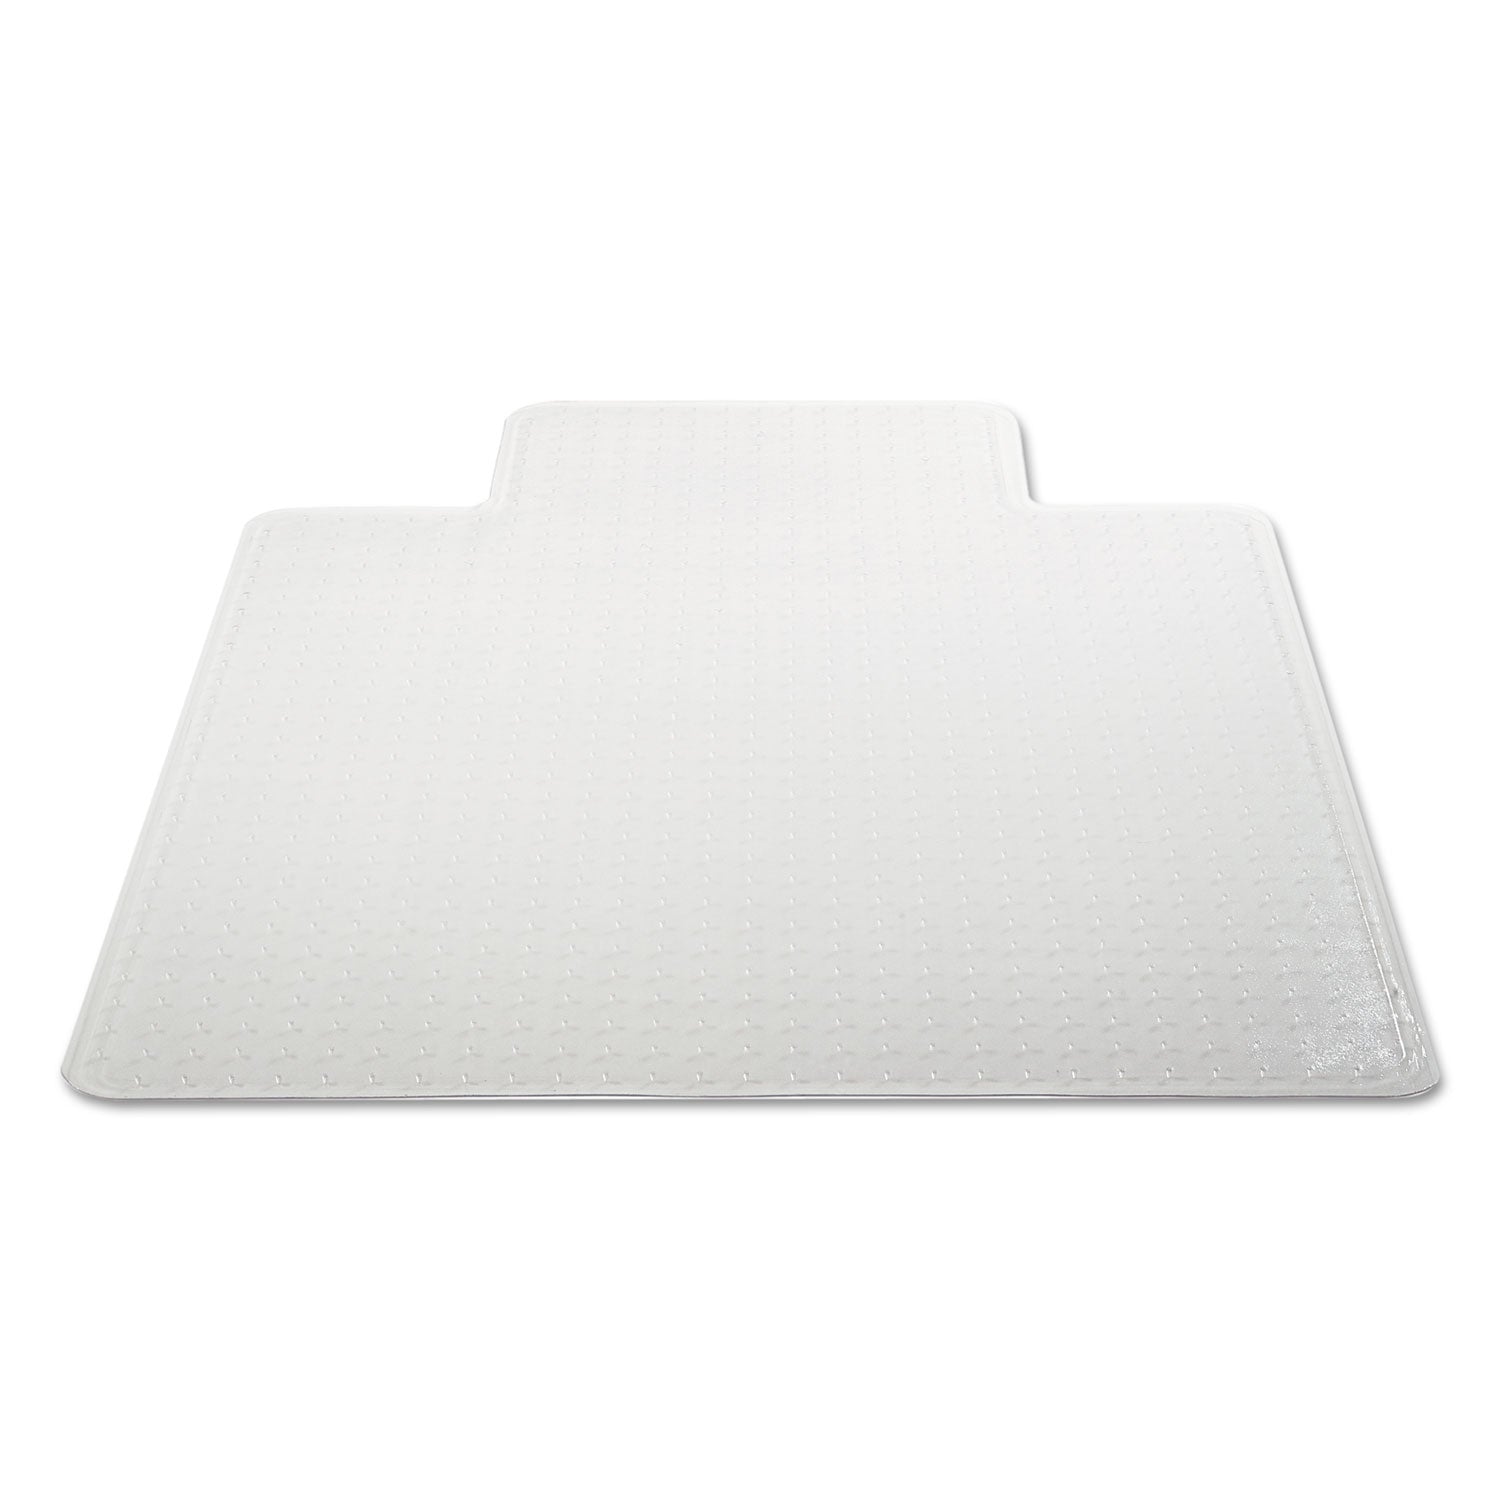 moderate-use-studded-chair-mat-for-low-pile-carpet-45-x-53-wide-lipped-clear_alemat4553clpl - 6